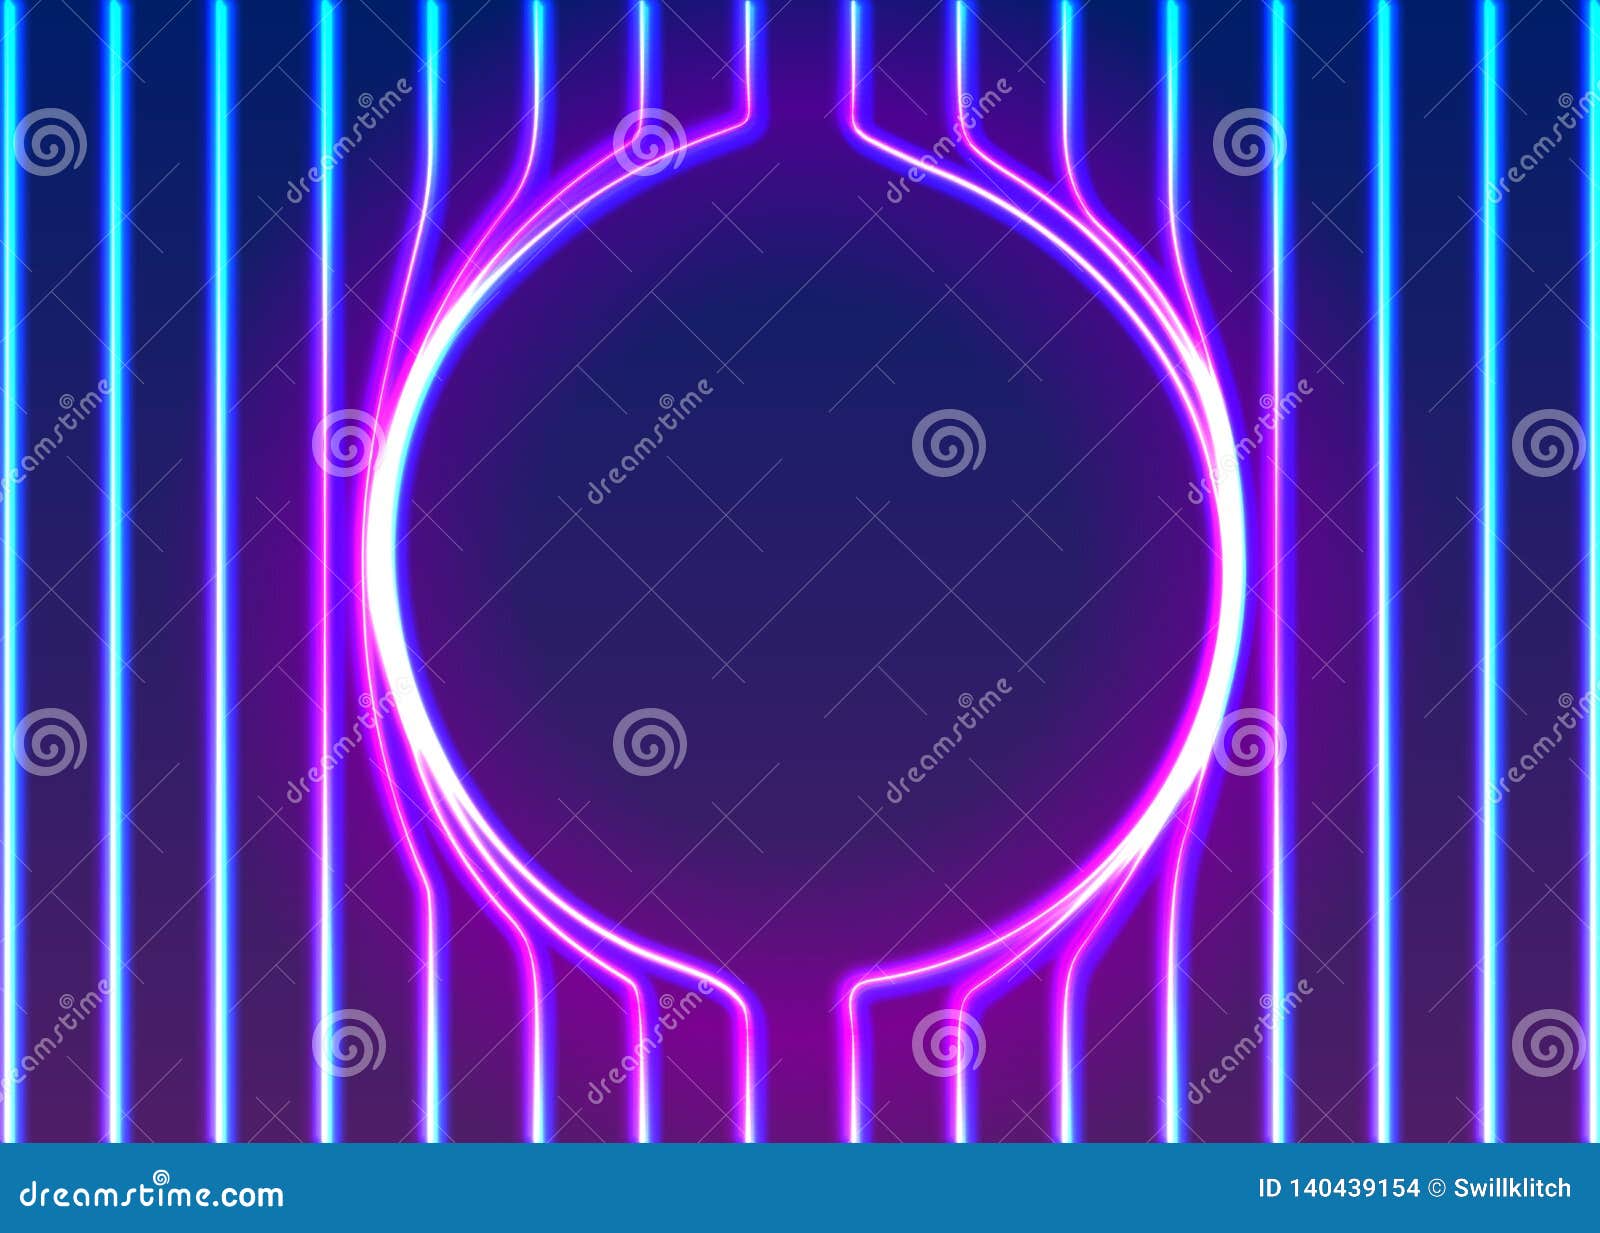 neon lines background with glowing 80s new retro vapor wave style